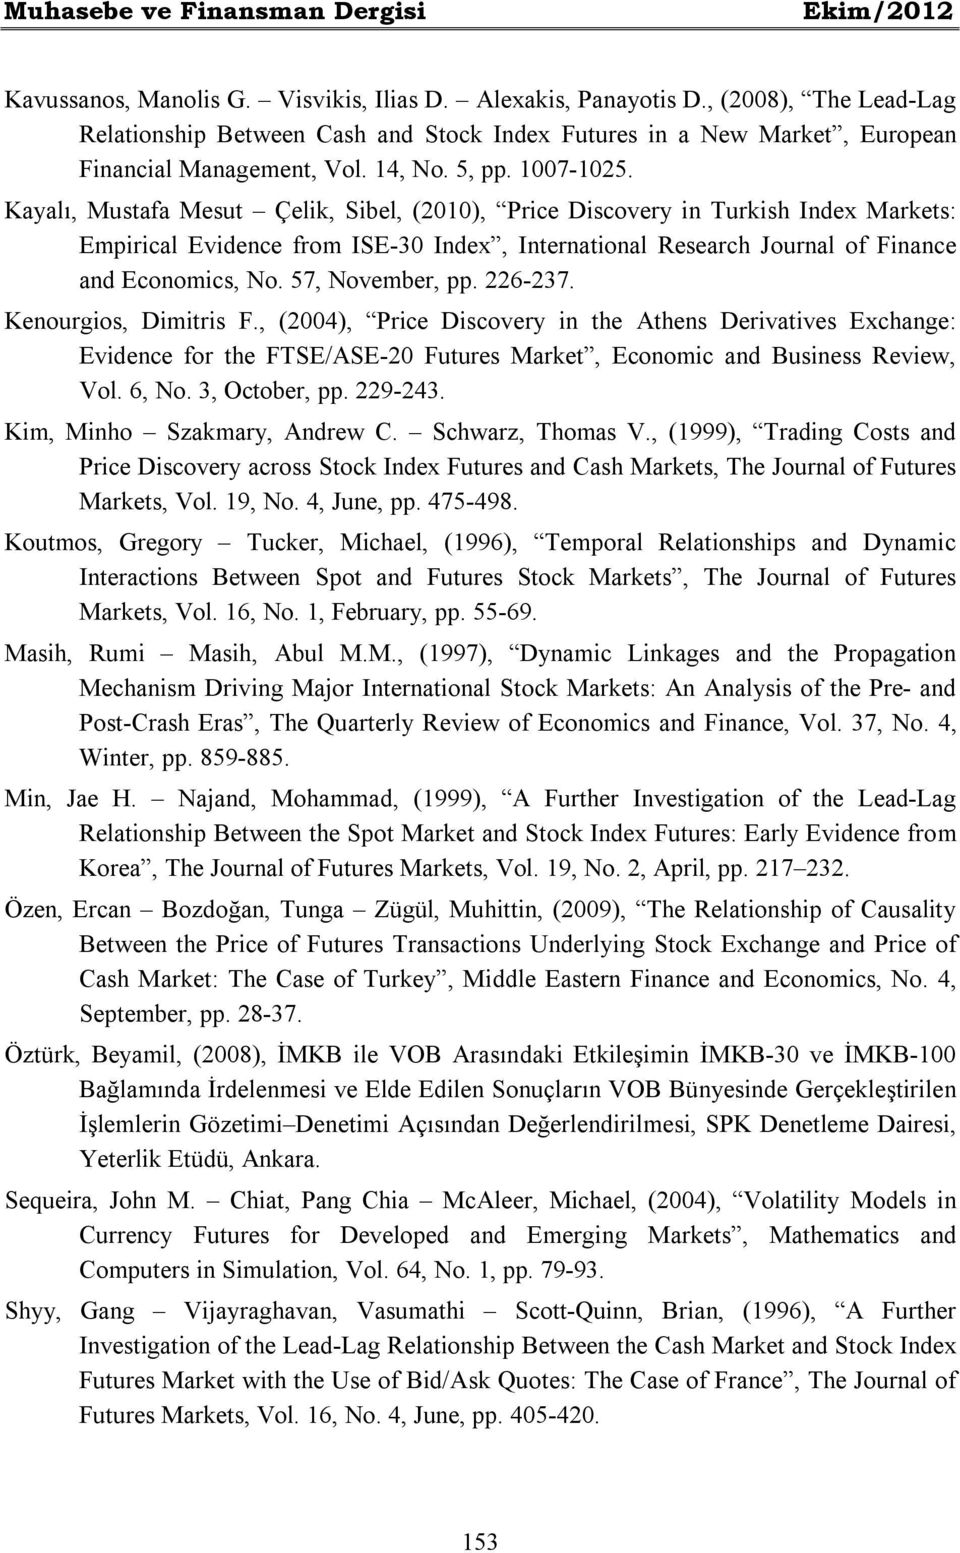 Kayalı, Mustafa Mesut Çelik, Sibel, (2010), Price Discovery in Turkish Index Markets: Empirical Evidence from ISE-30 Index, International Research Journal of Finance and Economics, No.